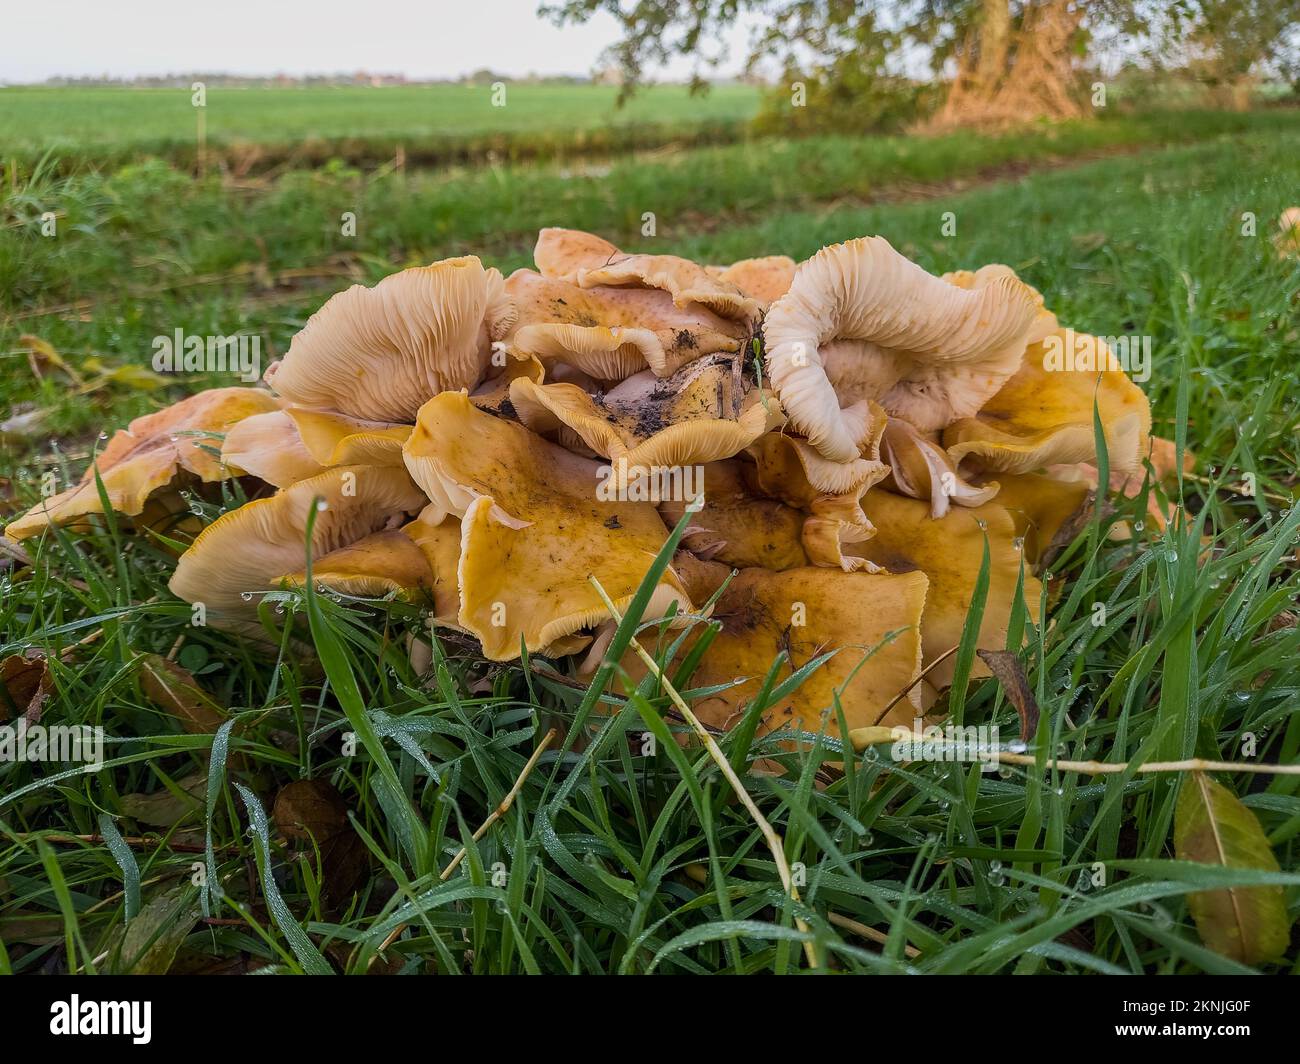 Close up of a group of densely growing yellow-brown mushrooms with clear plates, lamellae and curled cap brim in a damp grassy field Stock Photo